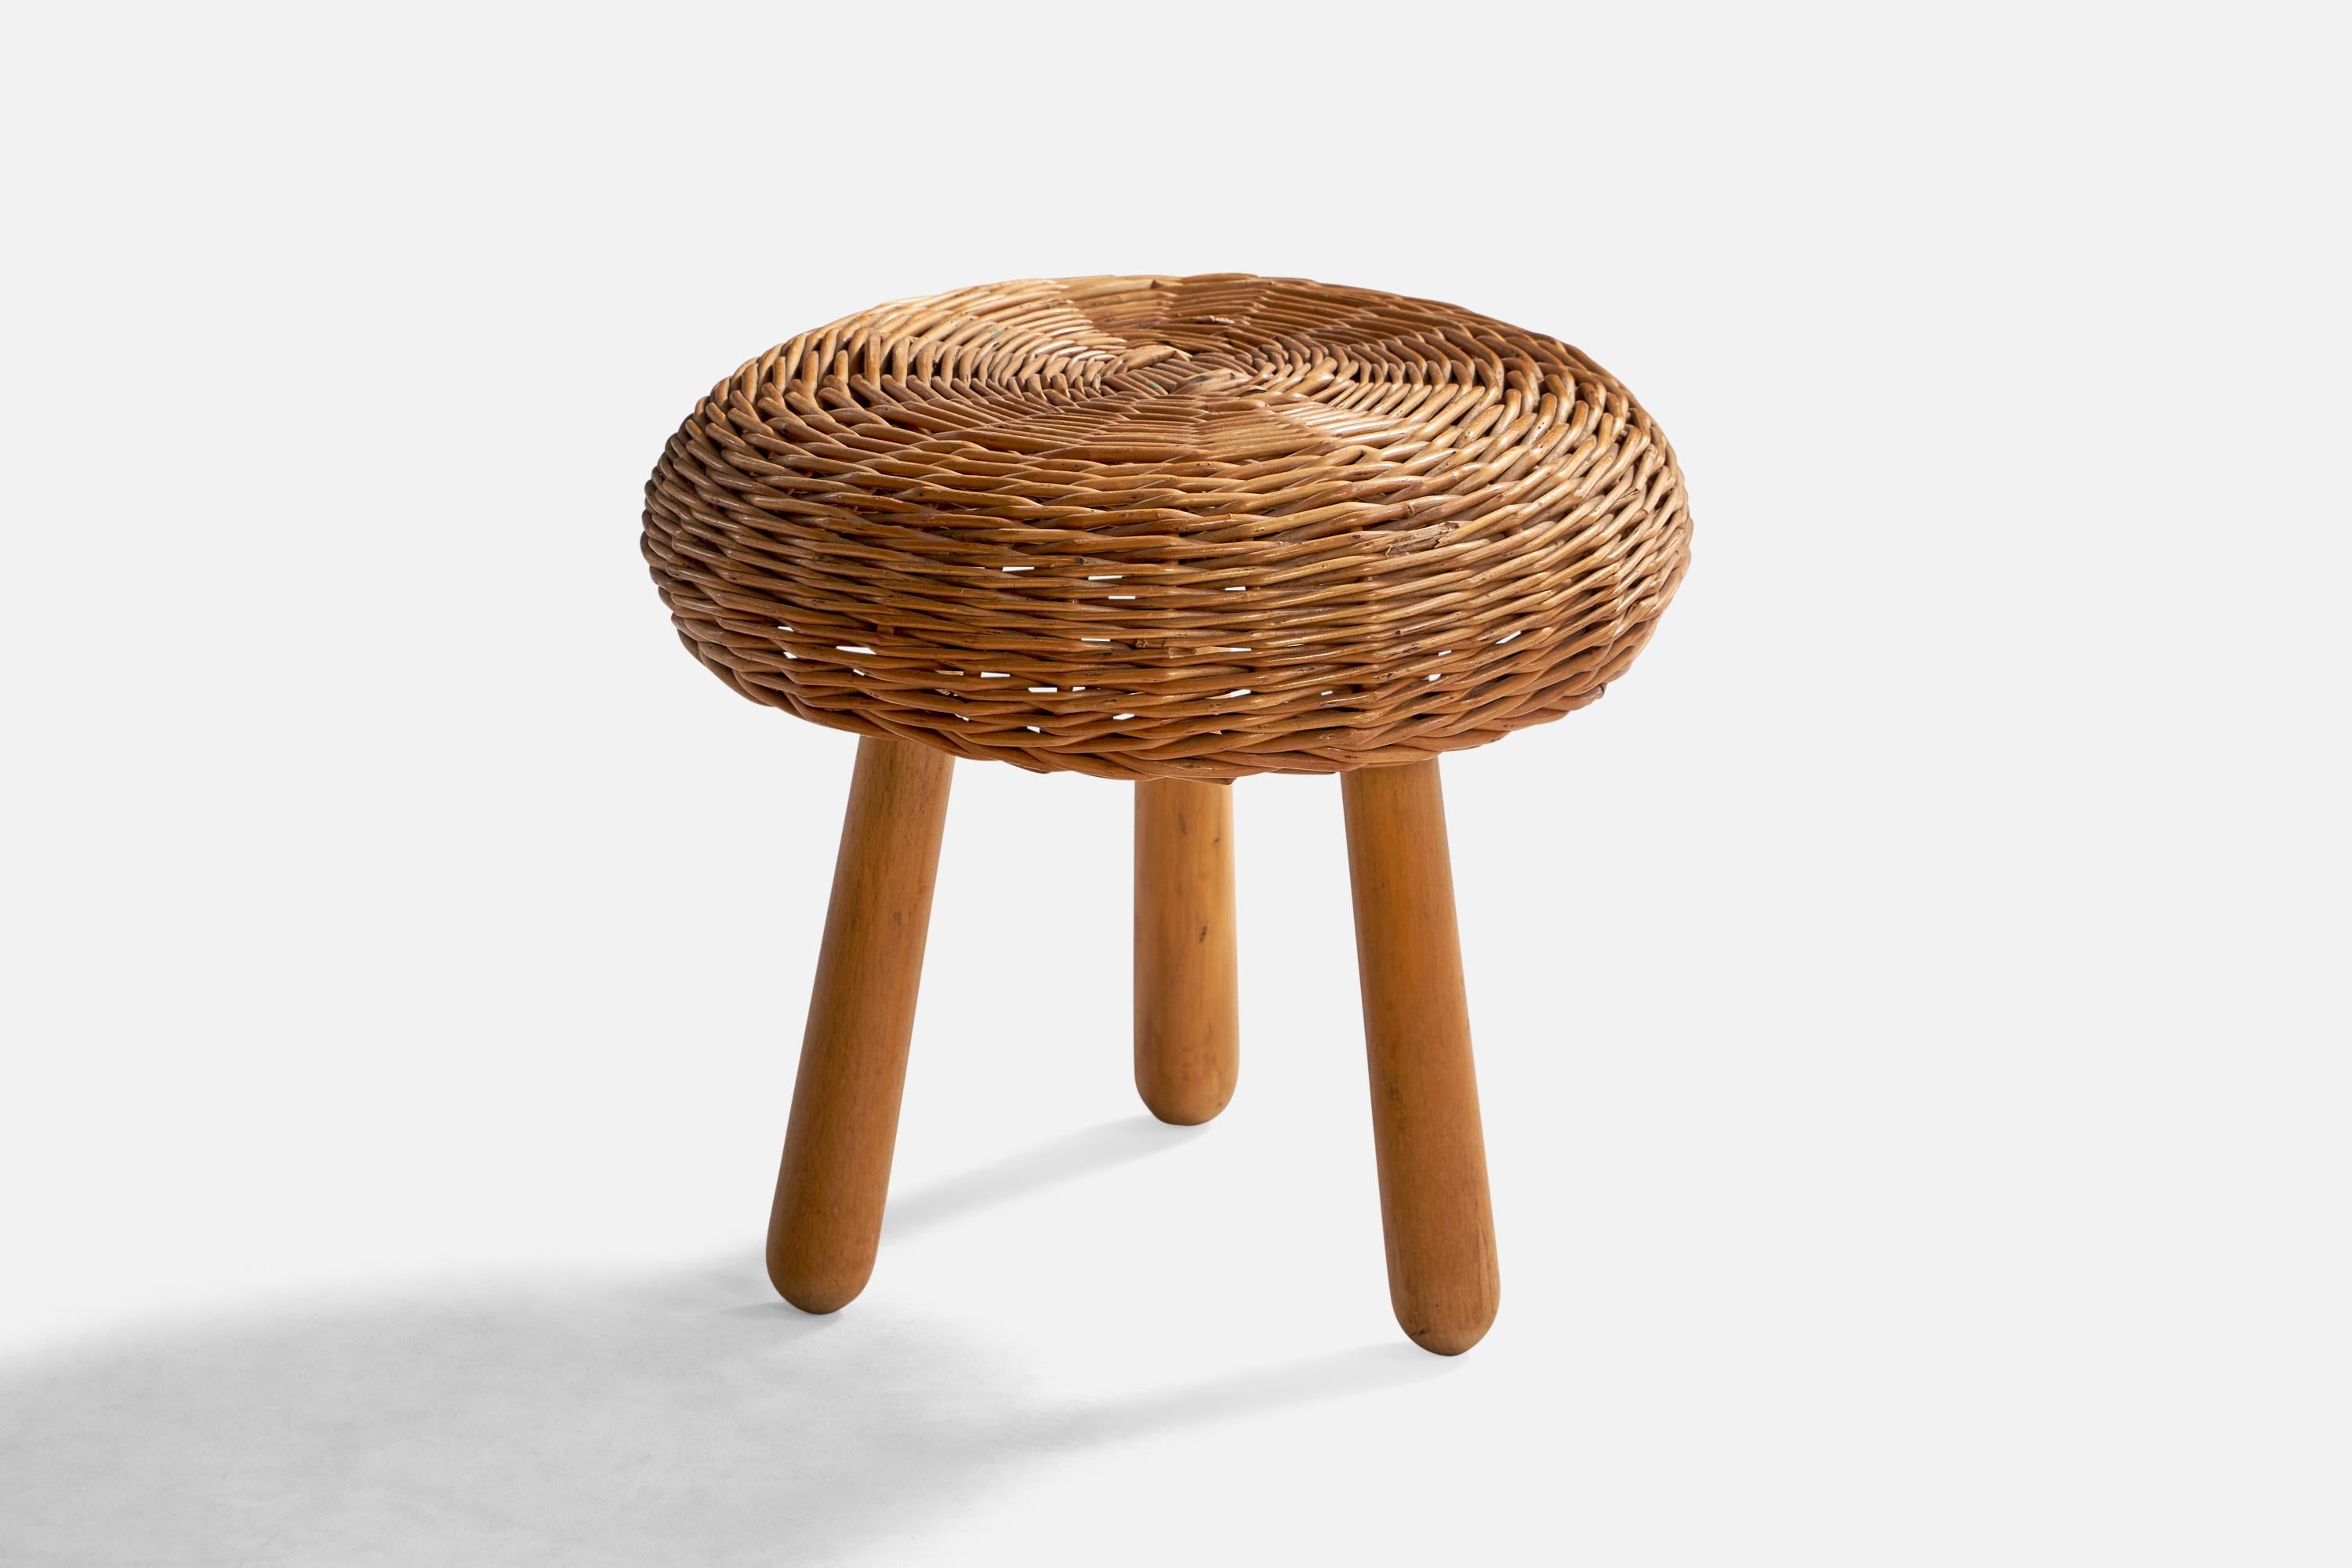 A woven rattan and wood stool designed and produced by Tony Paul, USA, 1960s.

Seat height: 10.75”